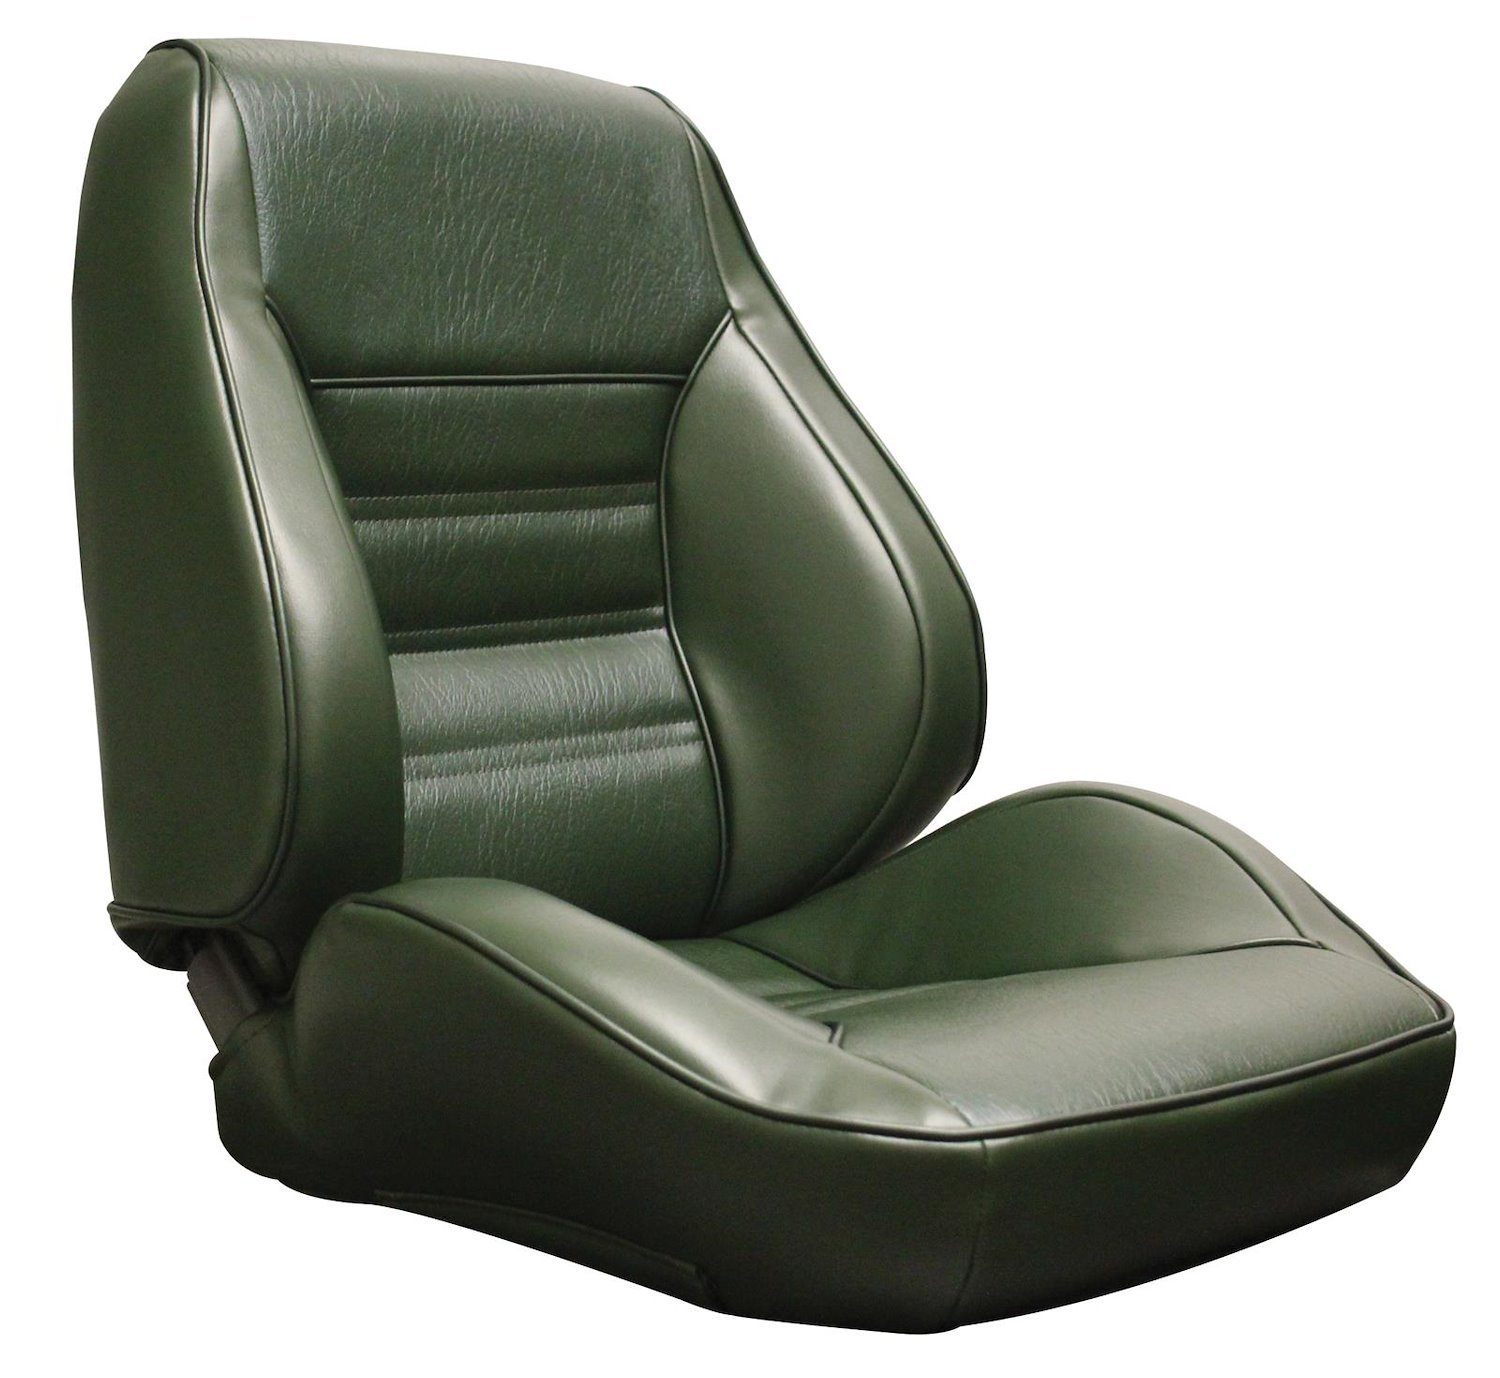 1970 Ford Mustang Standard Interior Blue Touring II Preassembled Reclining Front Bucket Seats